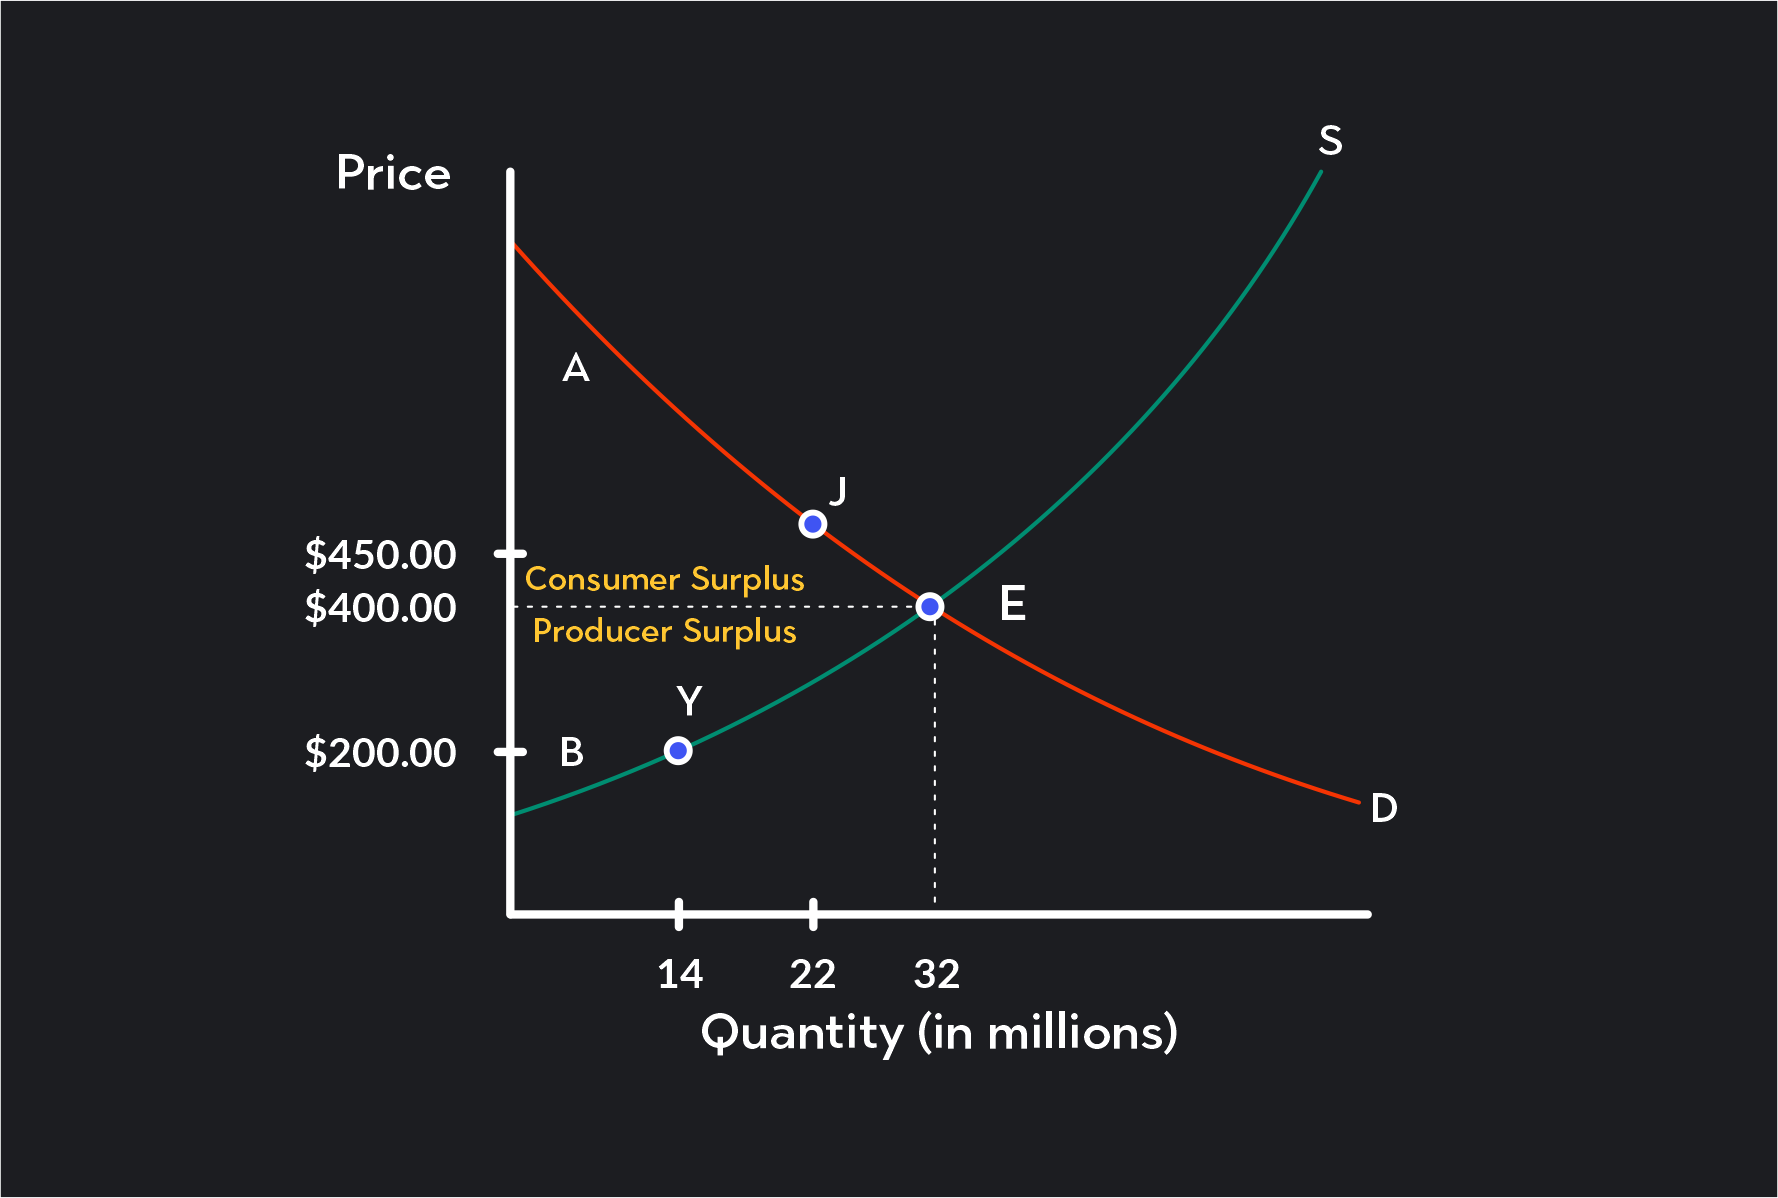 The graph shows that area a, which is above the market equilibrium price and beneath the demand curve, represents the total consumer surplus.